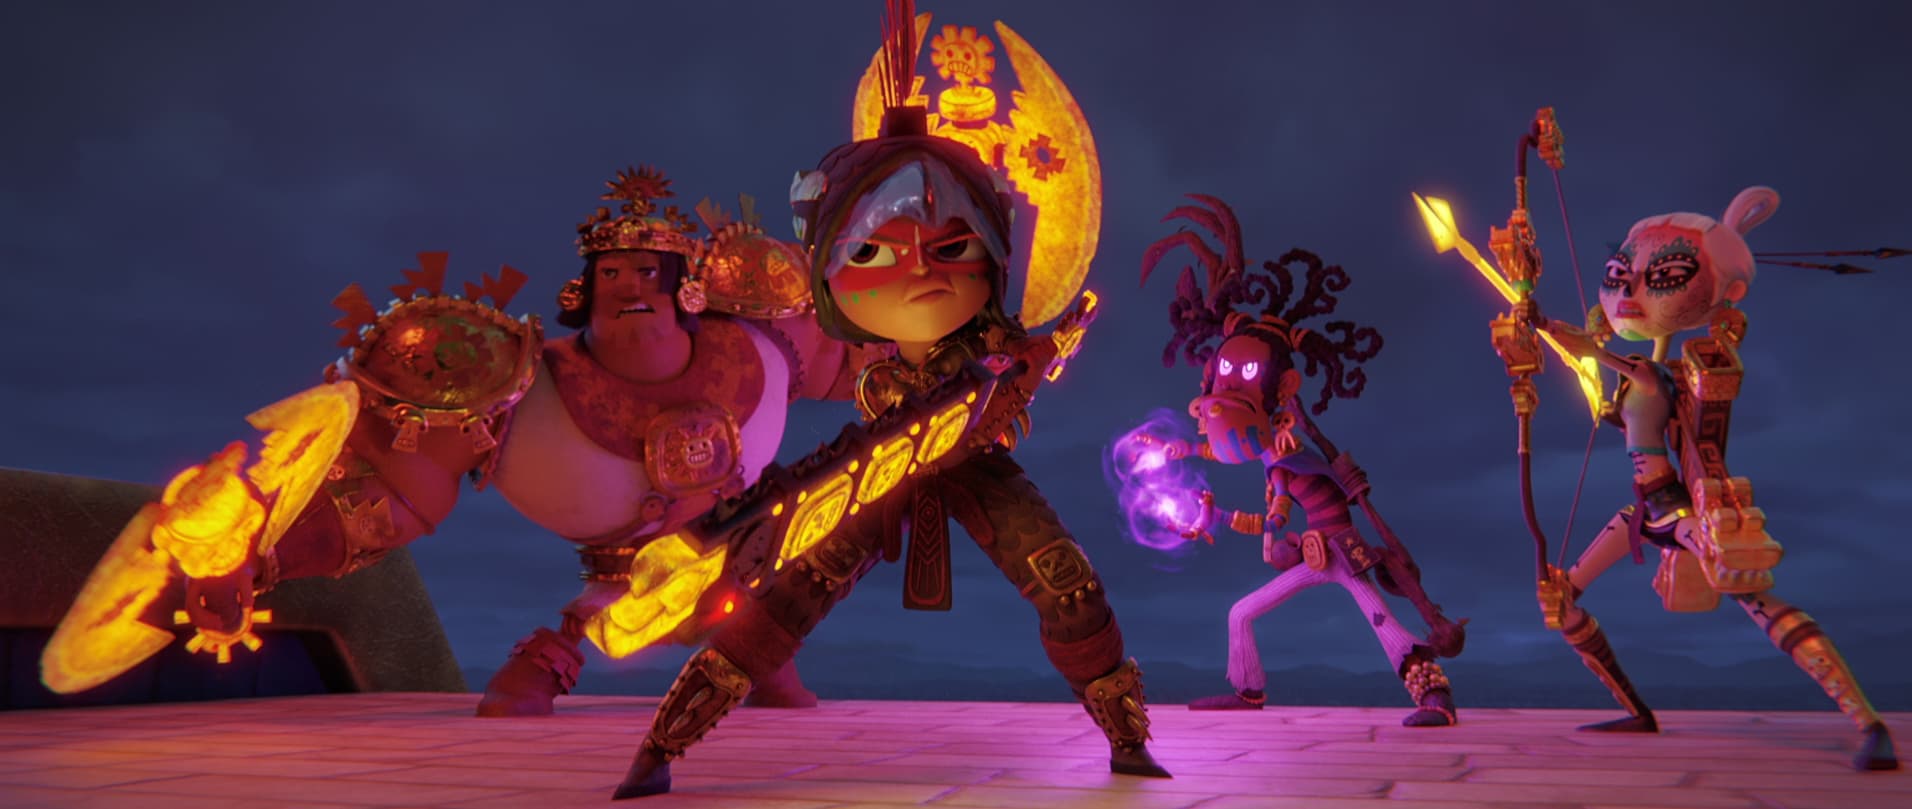 Maya and the Three Review: A Must Watch!